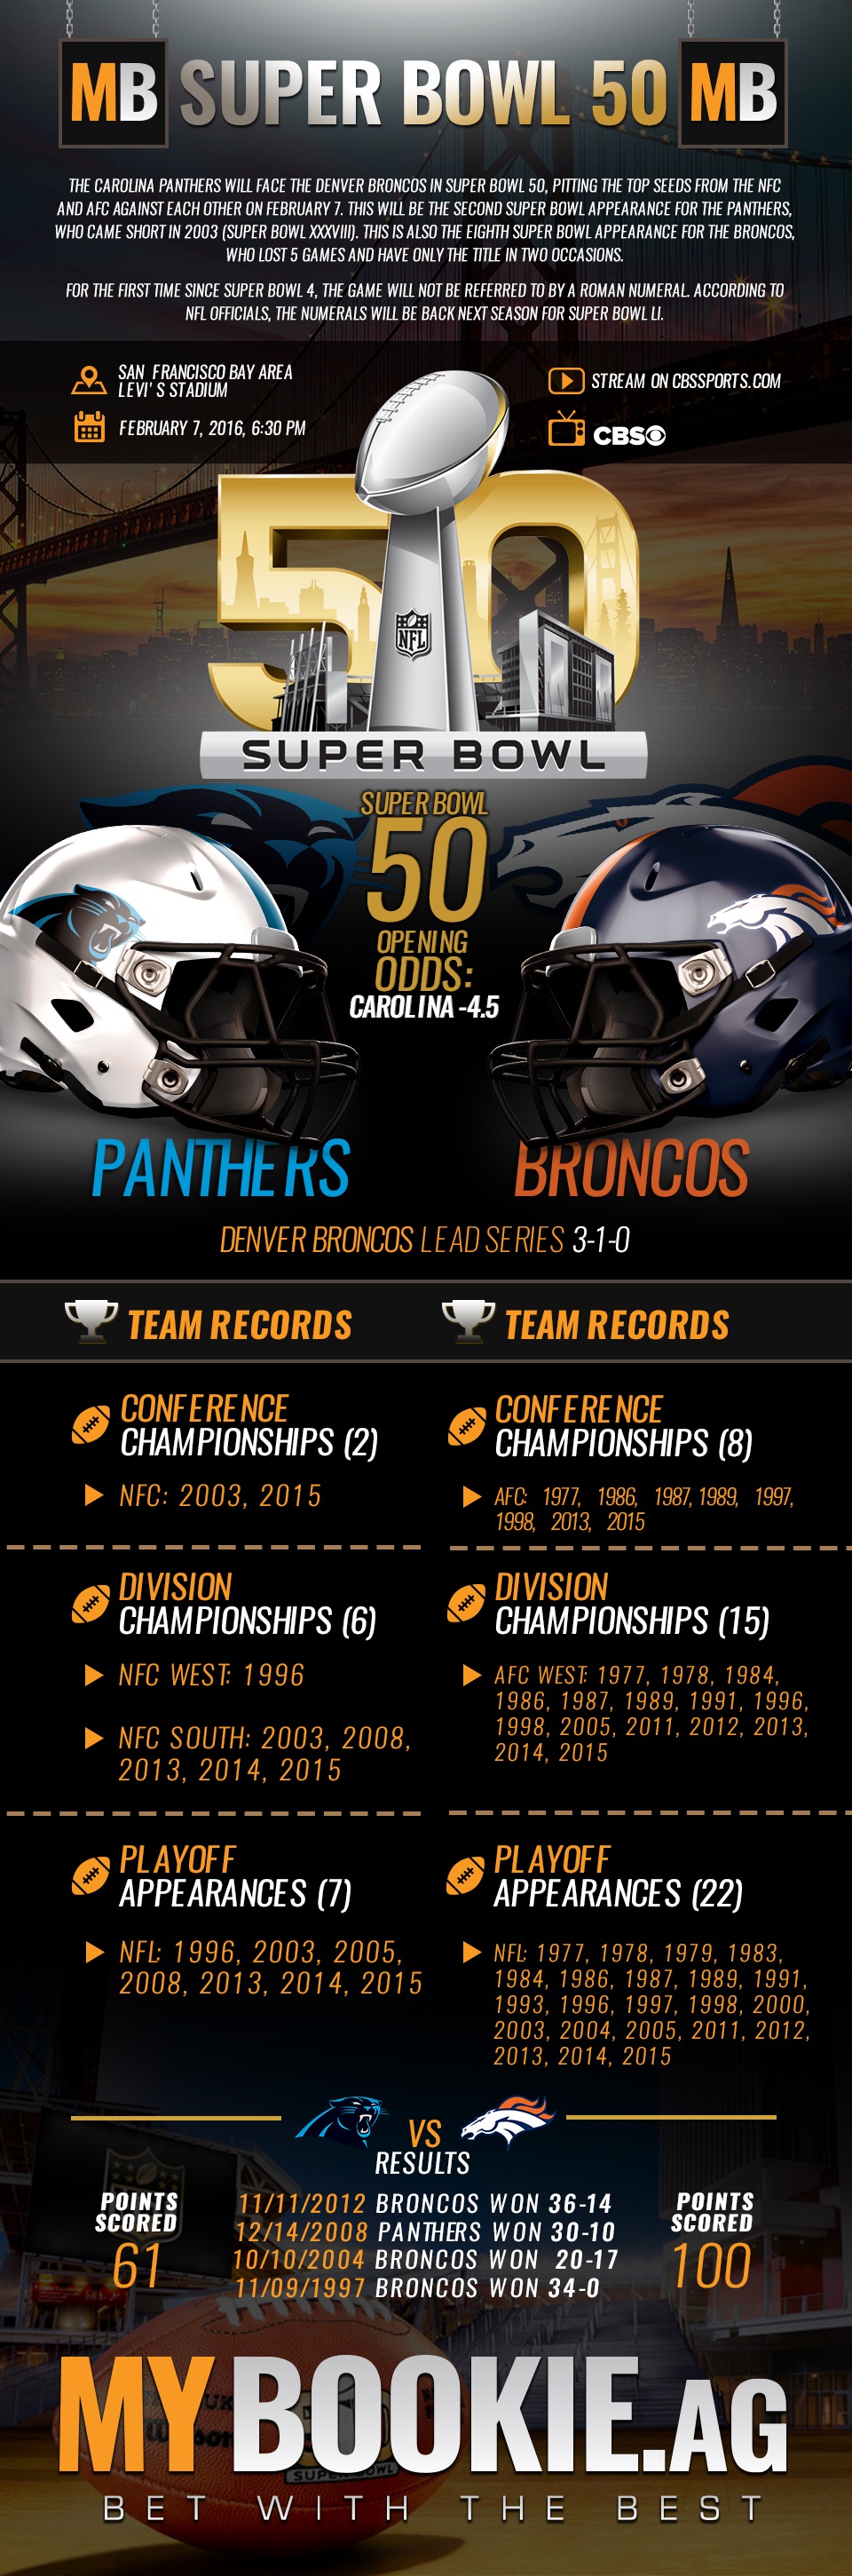 betting lines on super bowl 50